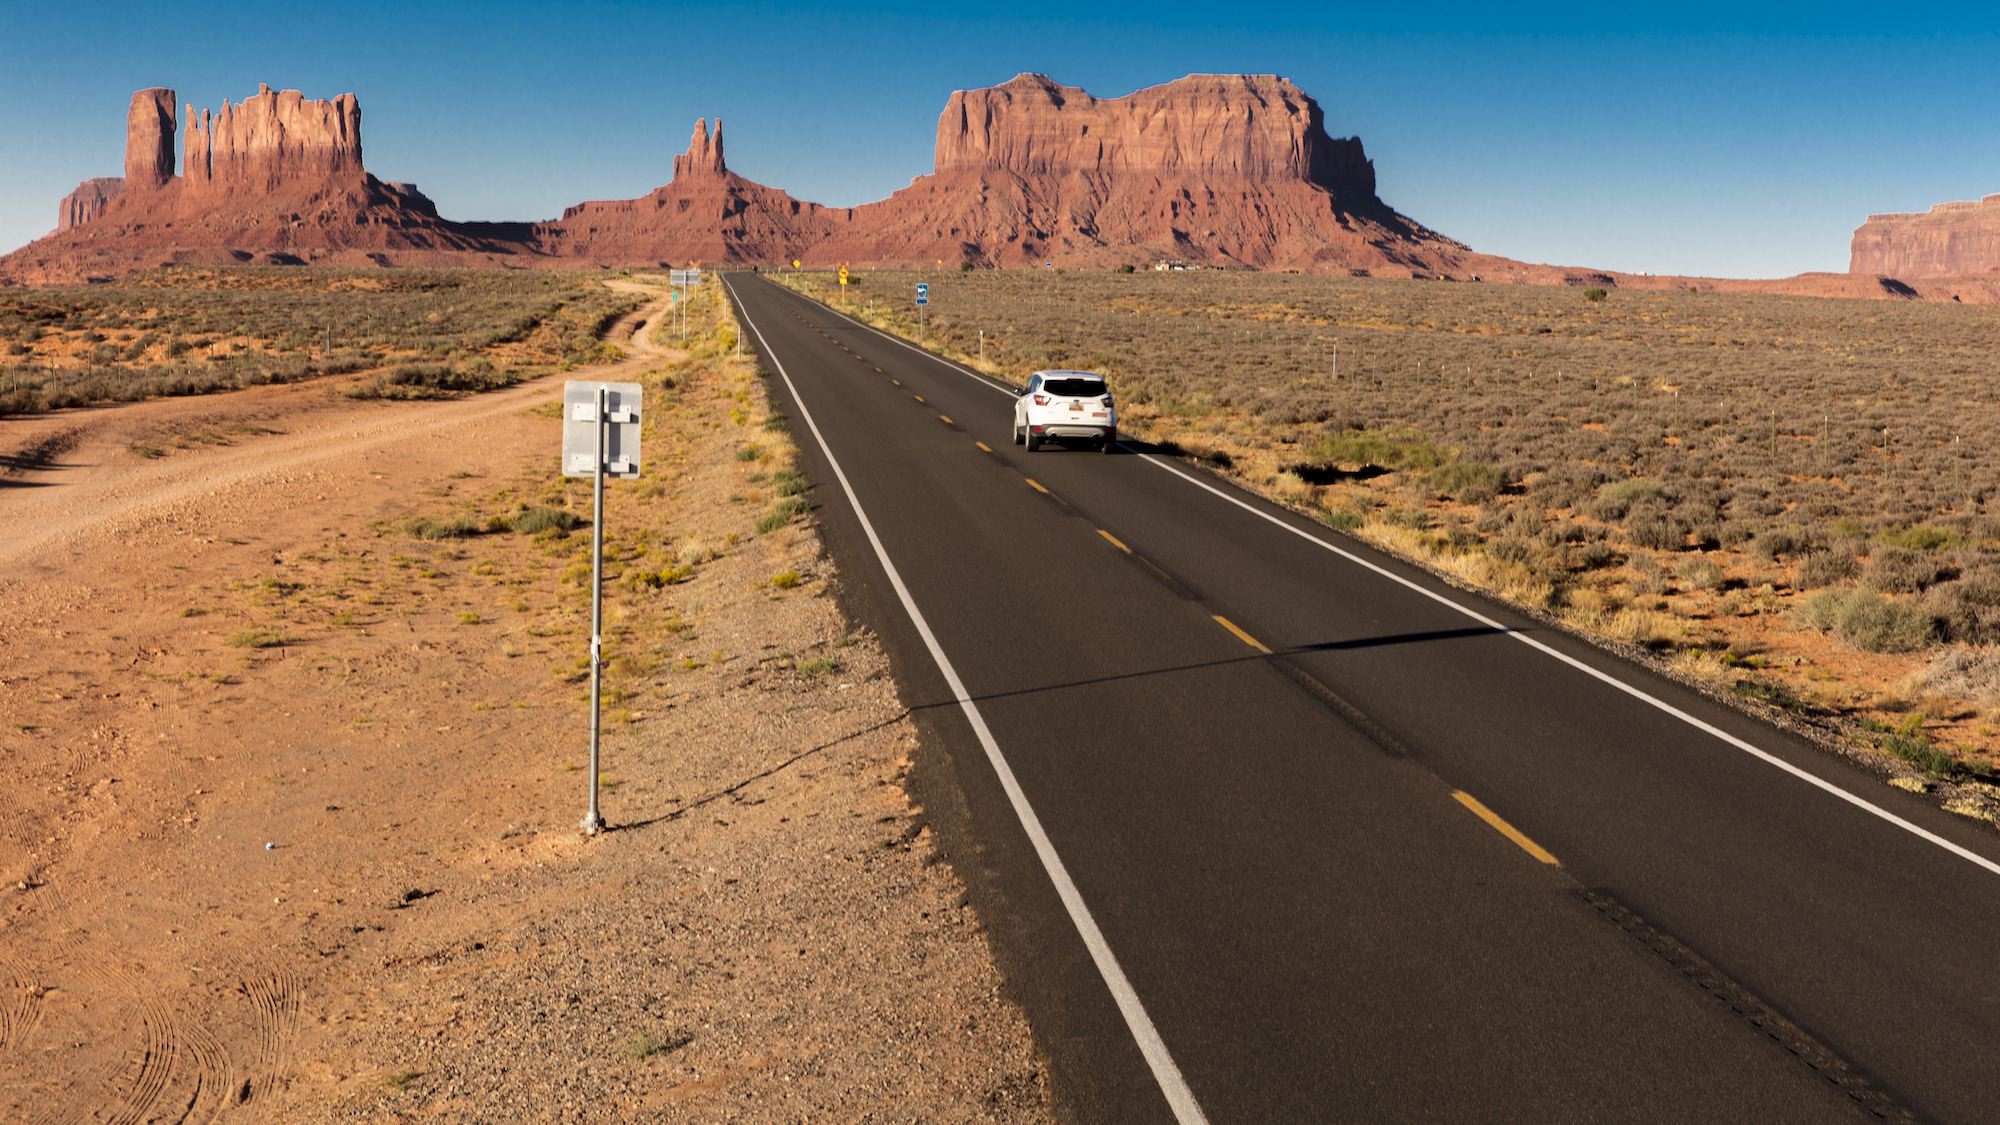 A white SUV on a road trip drives toward Monument Valley on the Utah-Arizona border in the American Southwest